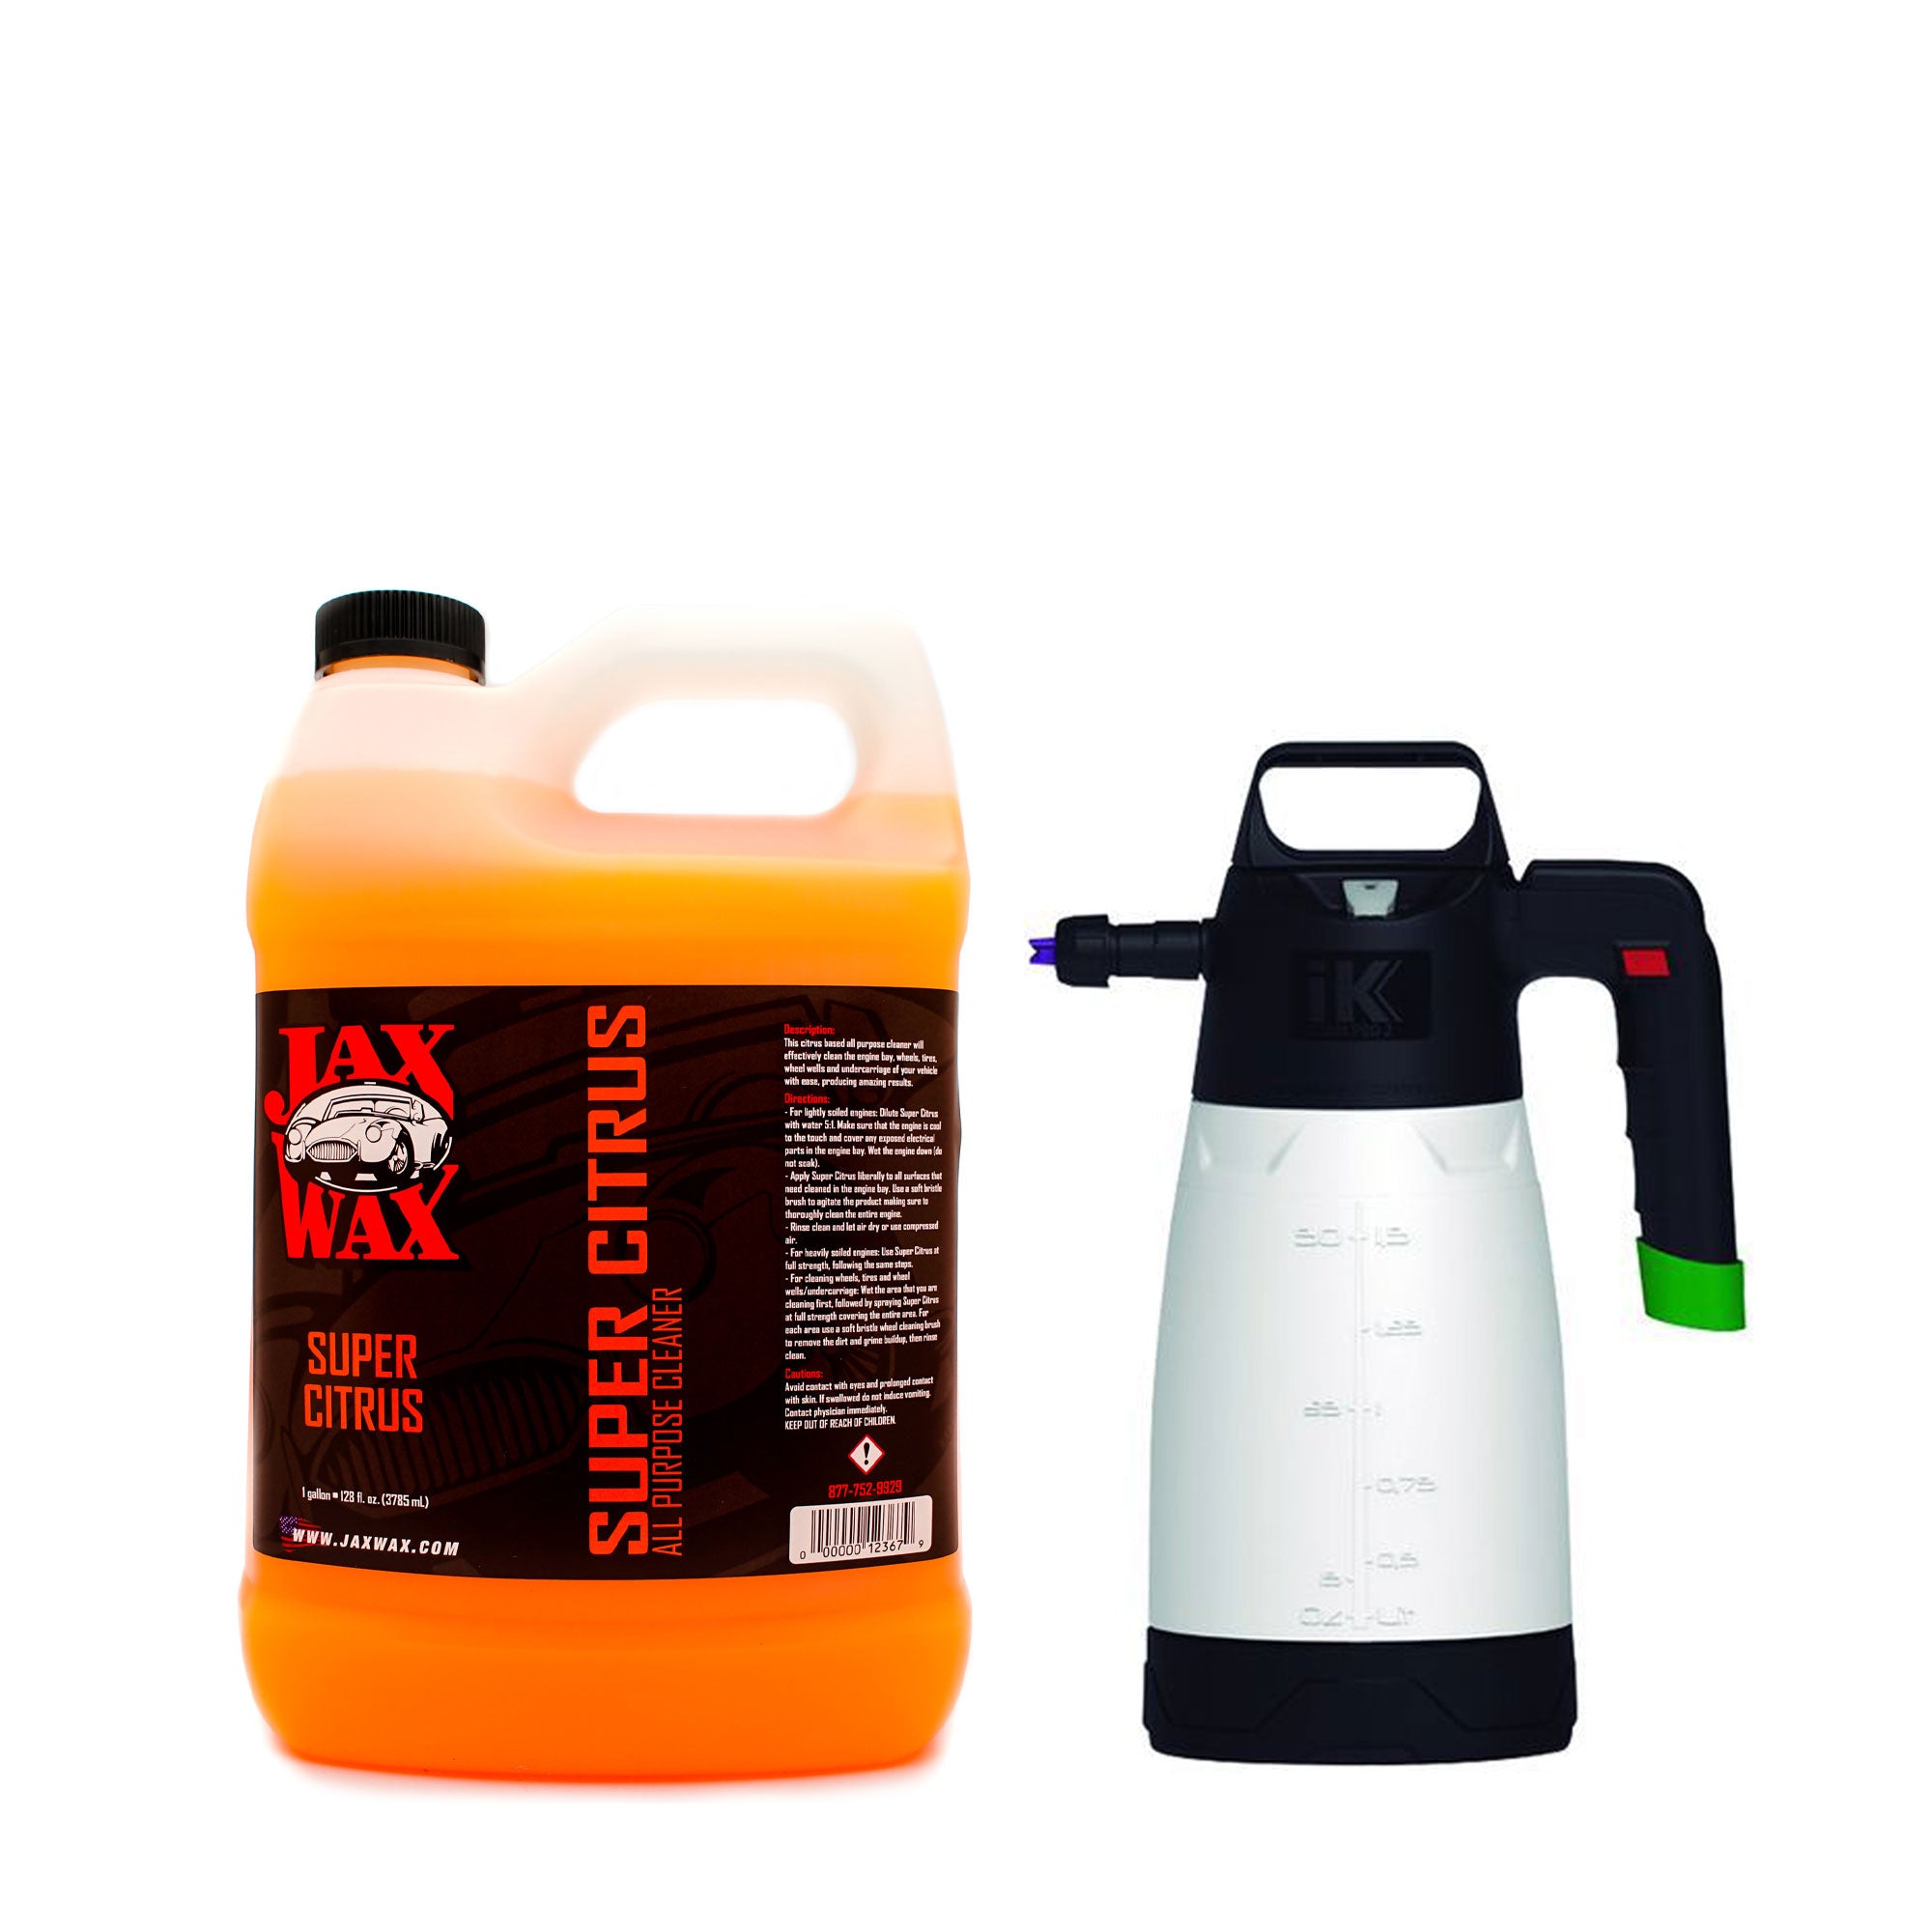  Lumintrail iK Foam PRO 2 Pump Sprayer, Professional Spray Bottle  for Automotive Cleaning, Detailing, and Industrial Cleaning, Bundle with a  Keychain Light : Automotive